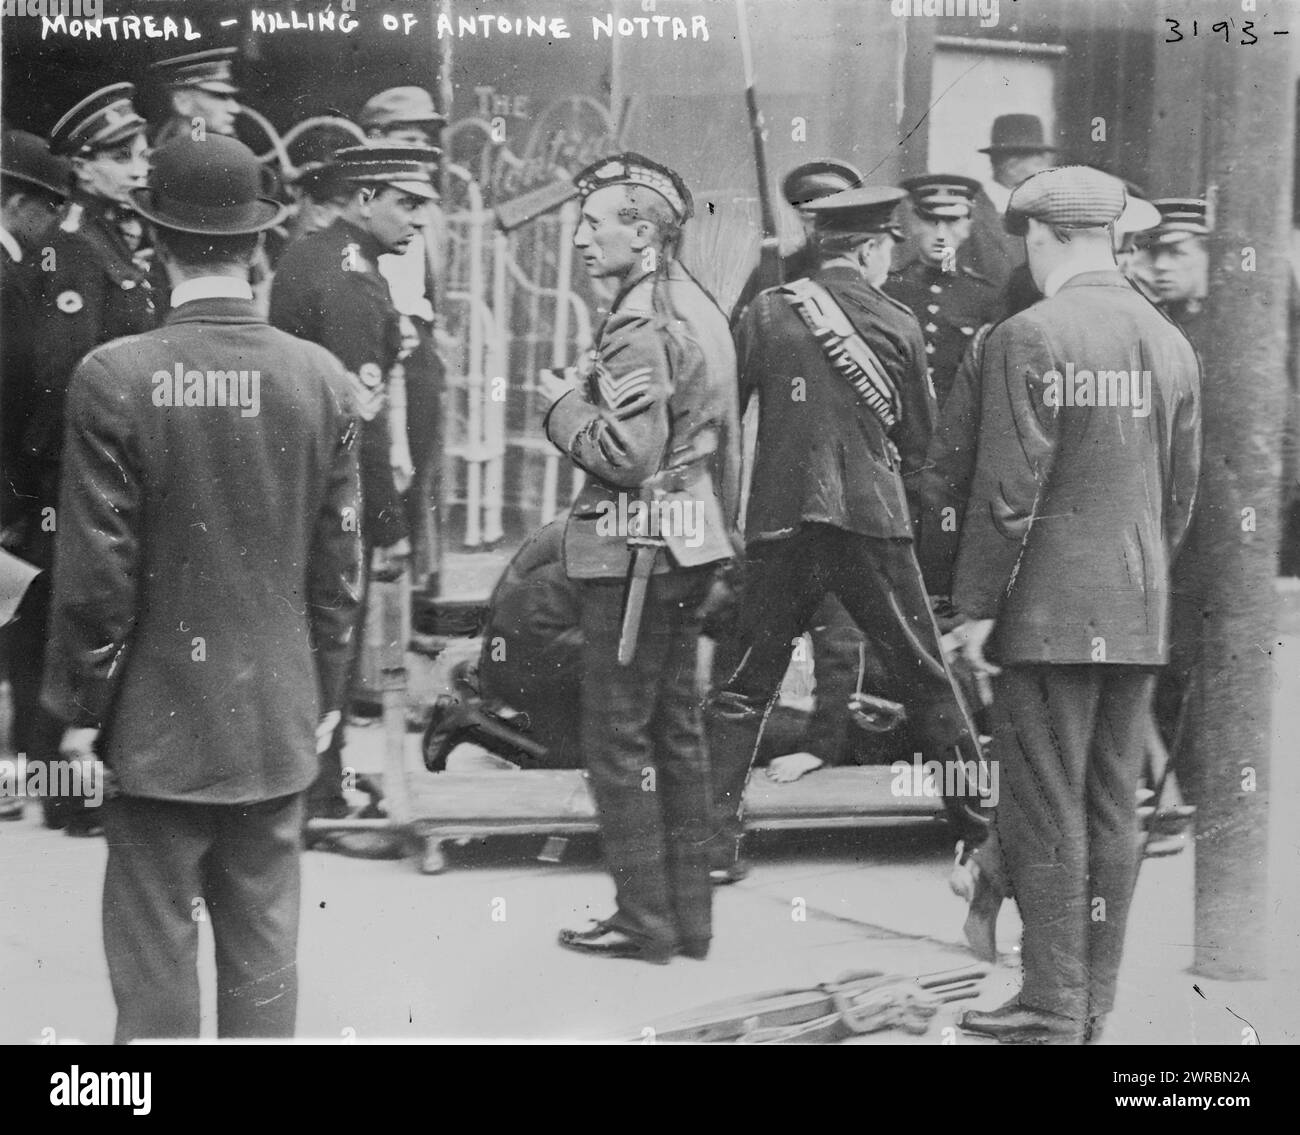 Montreal, killing of Antoine Nottar, Photograph shows scene of the shooting of Antoine Nottar, a French reservist shot by a Sgt. Hooten of the 5th Royal Highlanders in Montreal on August 14, 1914 in front of the Craig Street Armoury., 1914 Aug., Glass negatives, 1 negative: glass Stock Photo